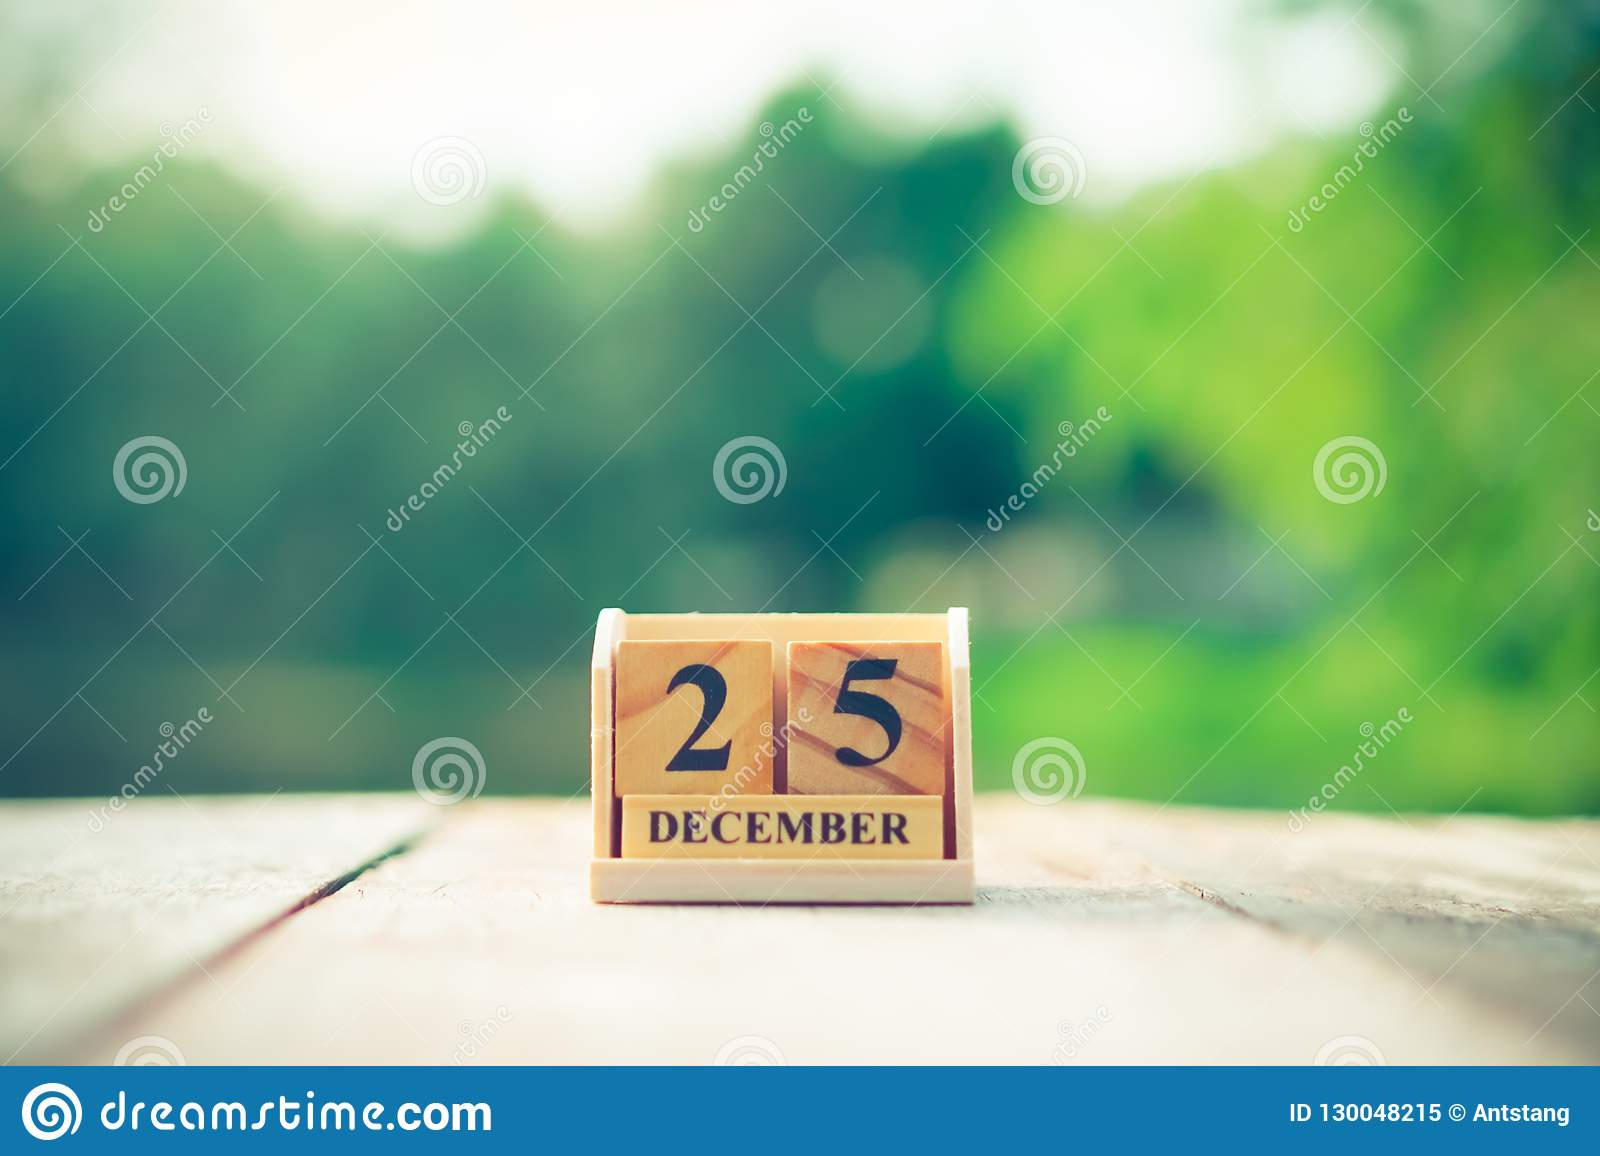 Wood Brick Block Show Date And Month Calendar Of 25Th